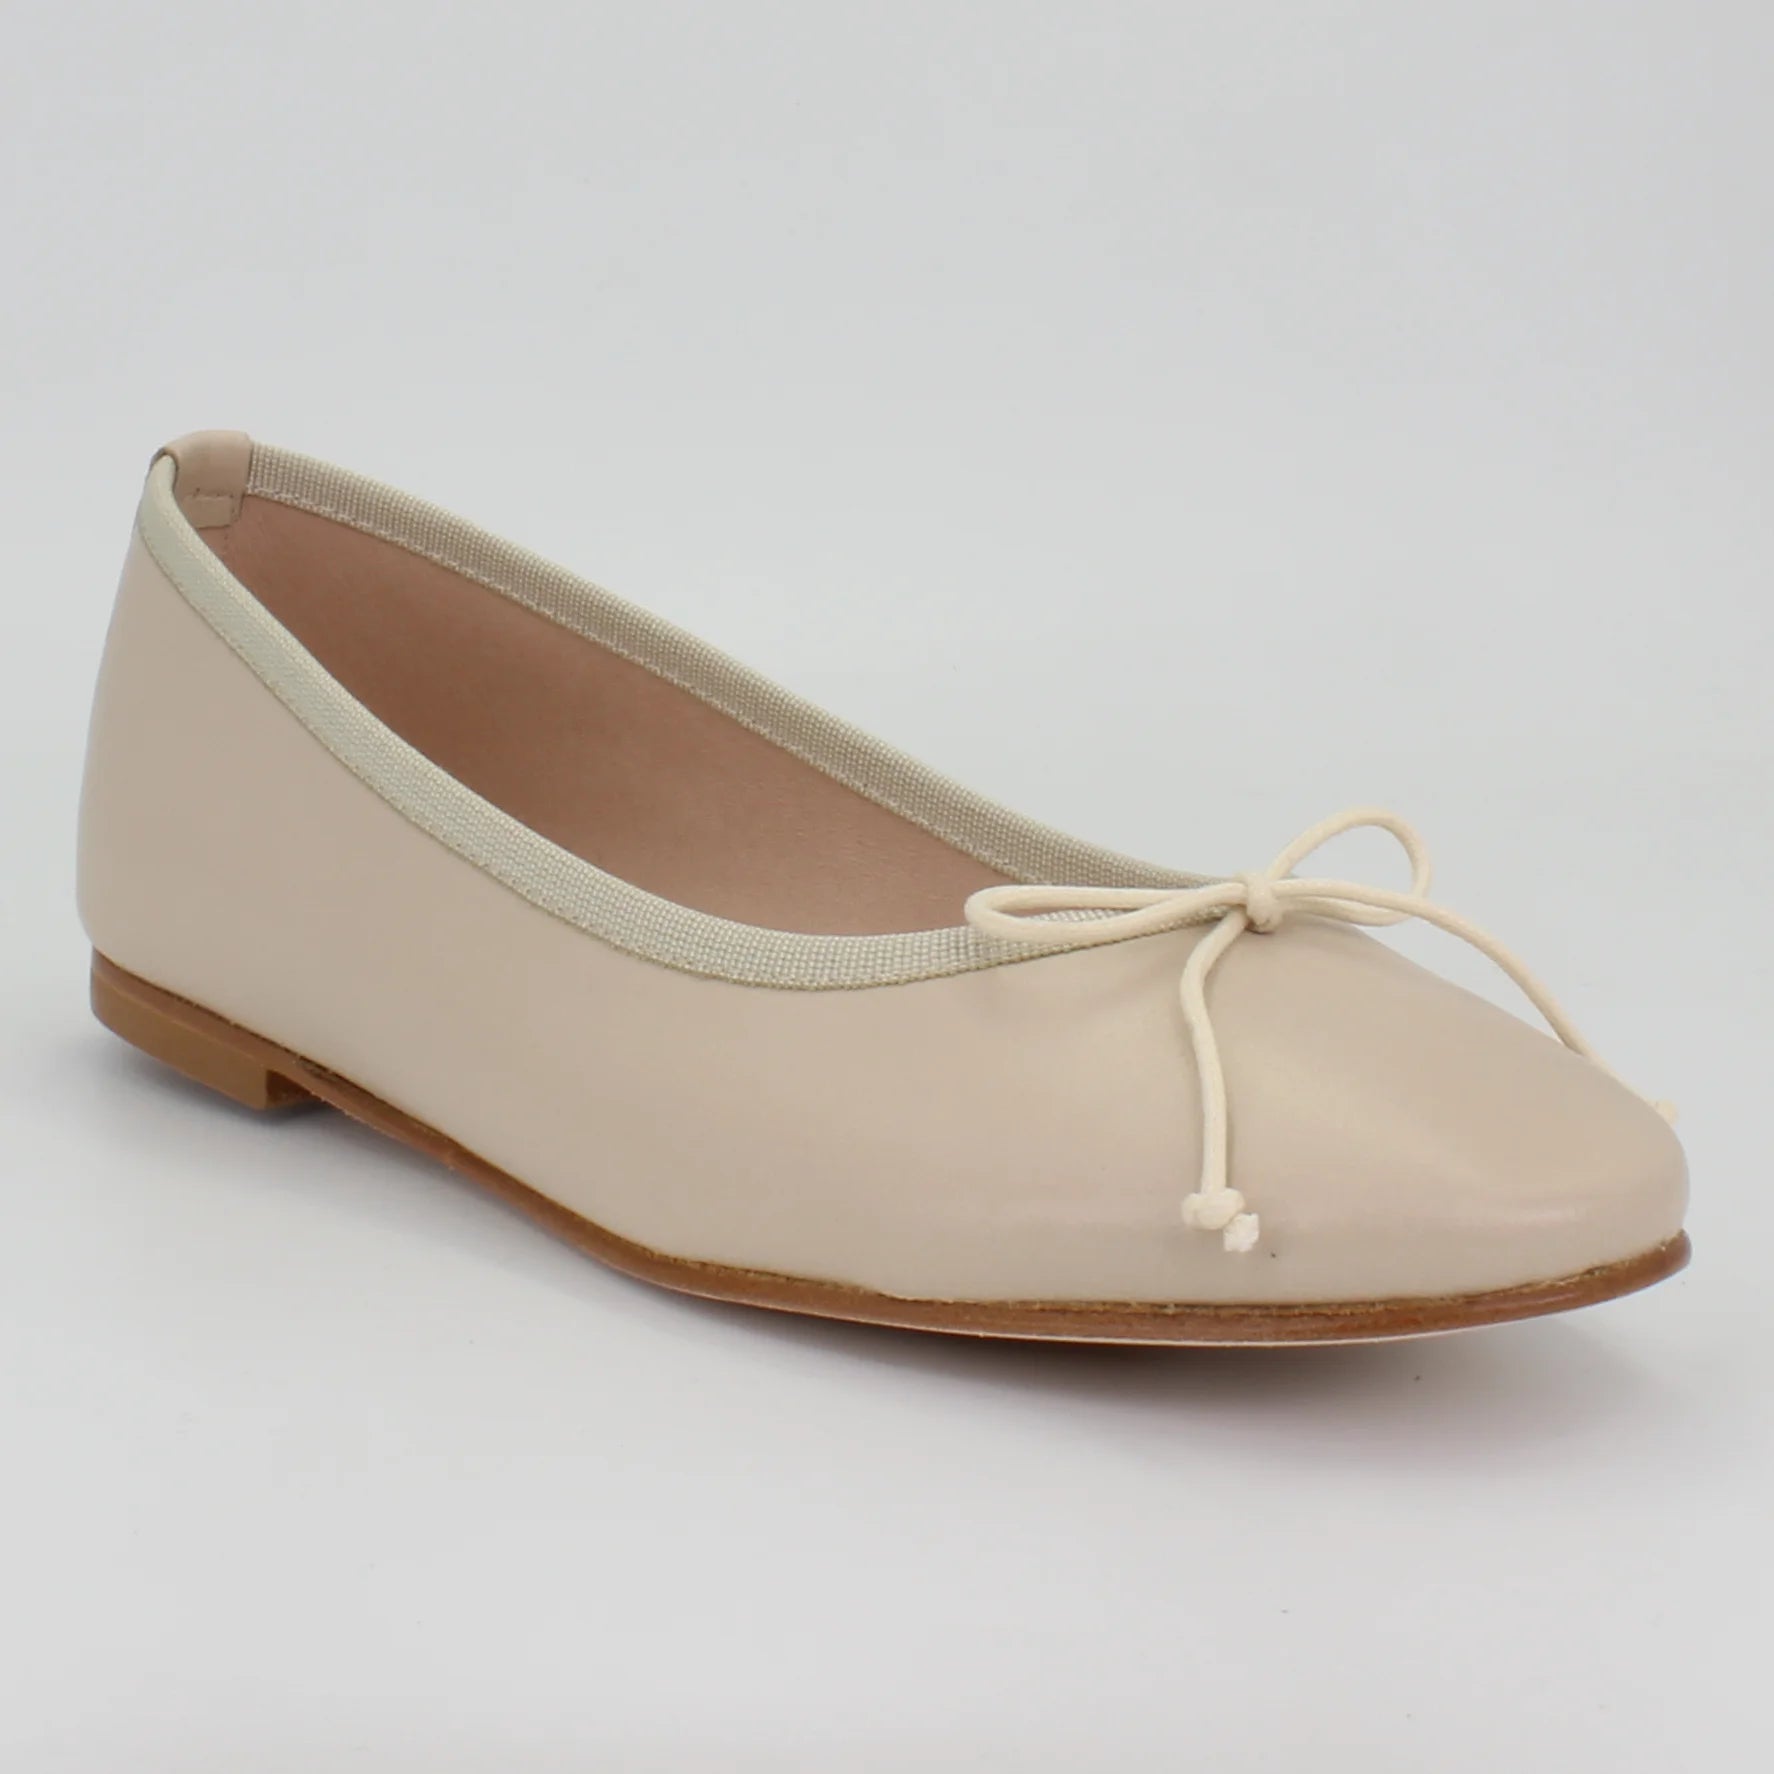 Shop Handmade Italian Leather Ballerina pump in ice cream (E429) or browse our range of hand-made Italian shoes in leather or suede in-store at Aliverti Cape Town, or shop online. We deliver in South Africa & offer multiple payment plans as well as accept multiple safe & secure payment methods.